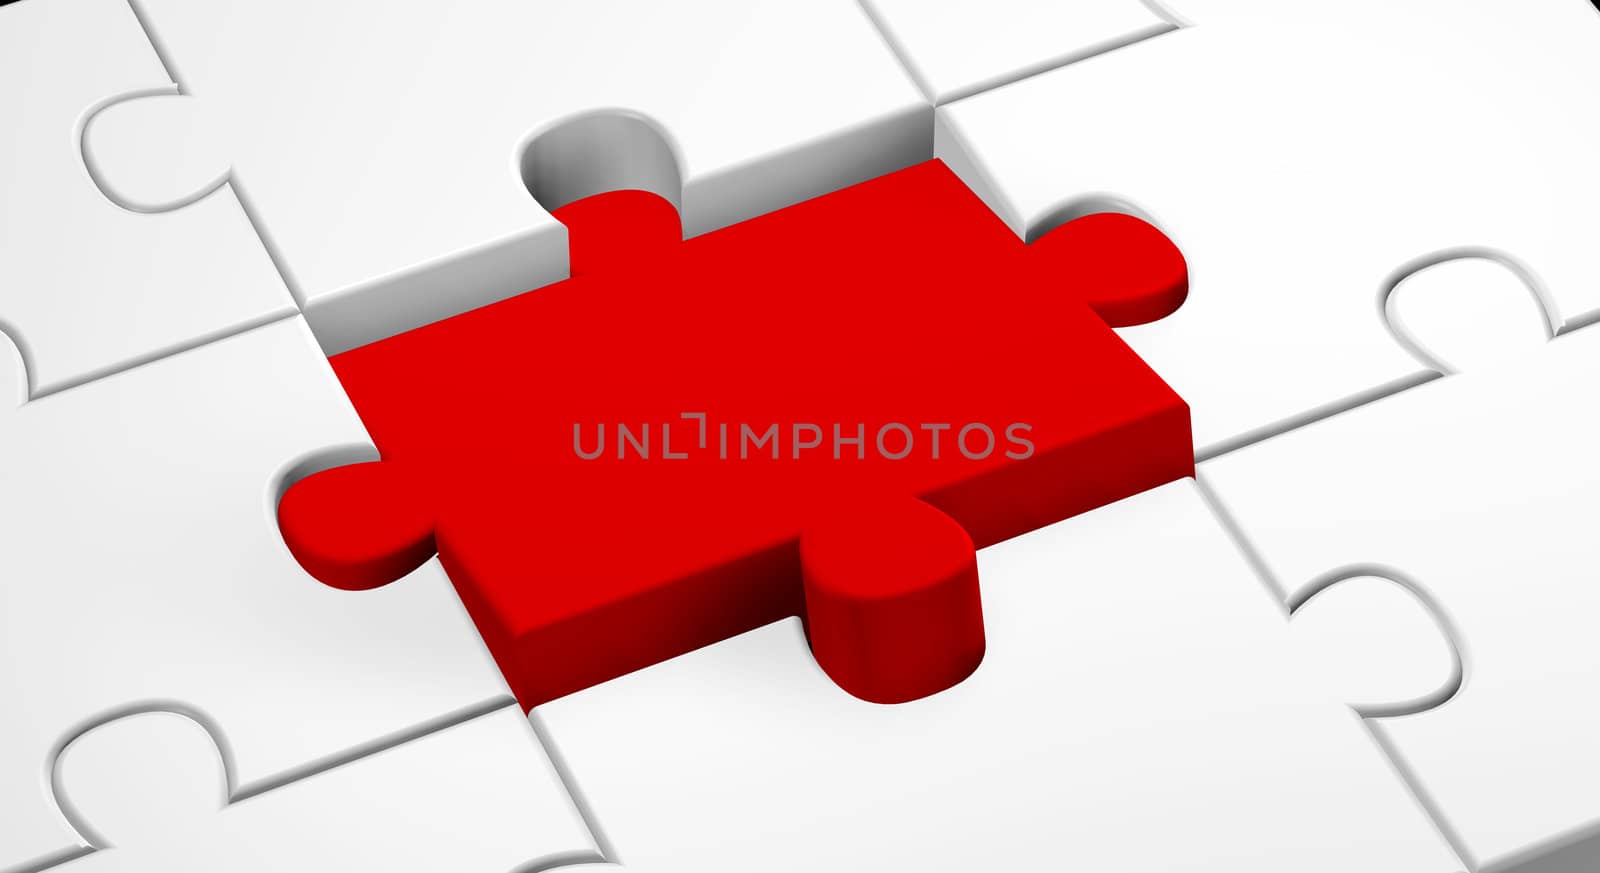 Illustration of color puzzle pieces with a red piece